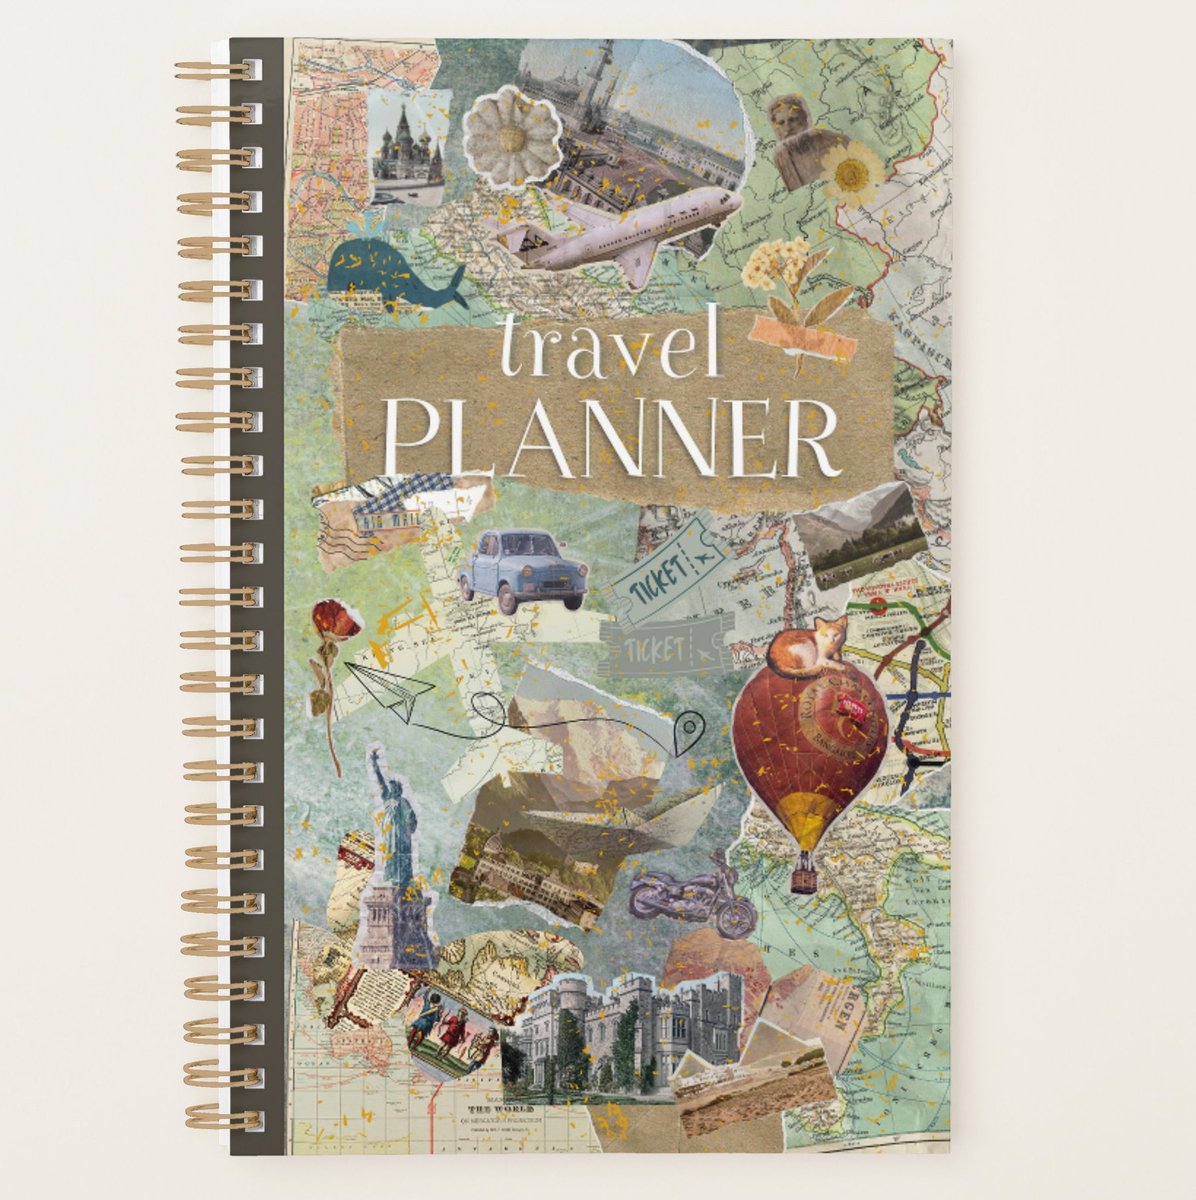 ▶️ zazzle.com/vintage_collag…

Save 20% with code THREEDAYDEAL ends today

#zazzle #travelplanner #sale